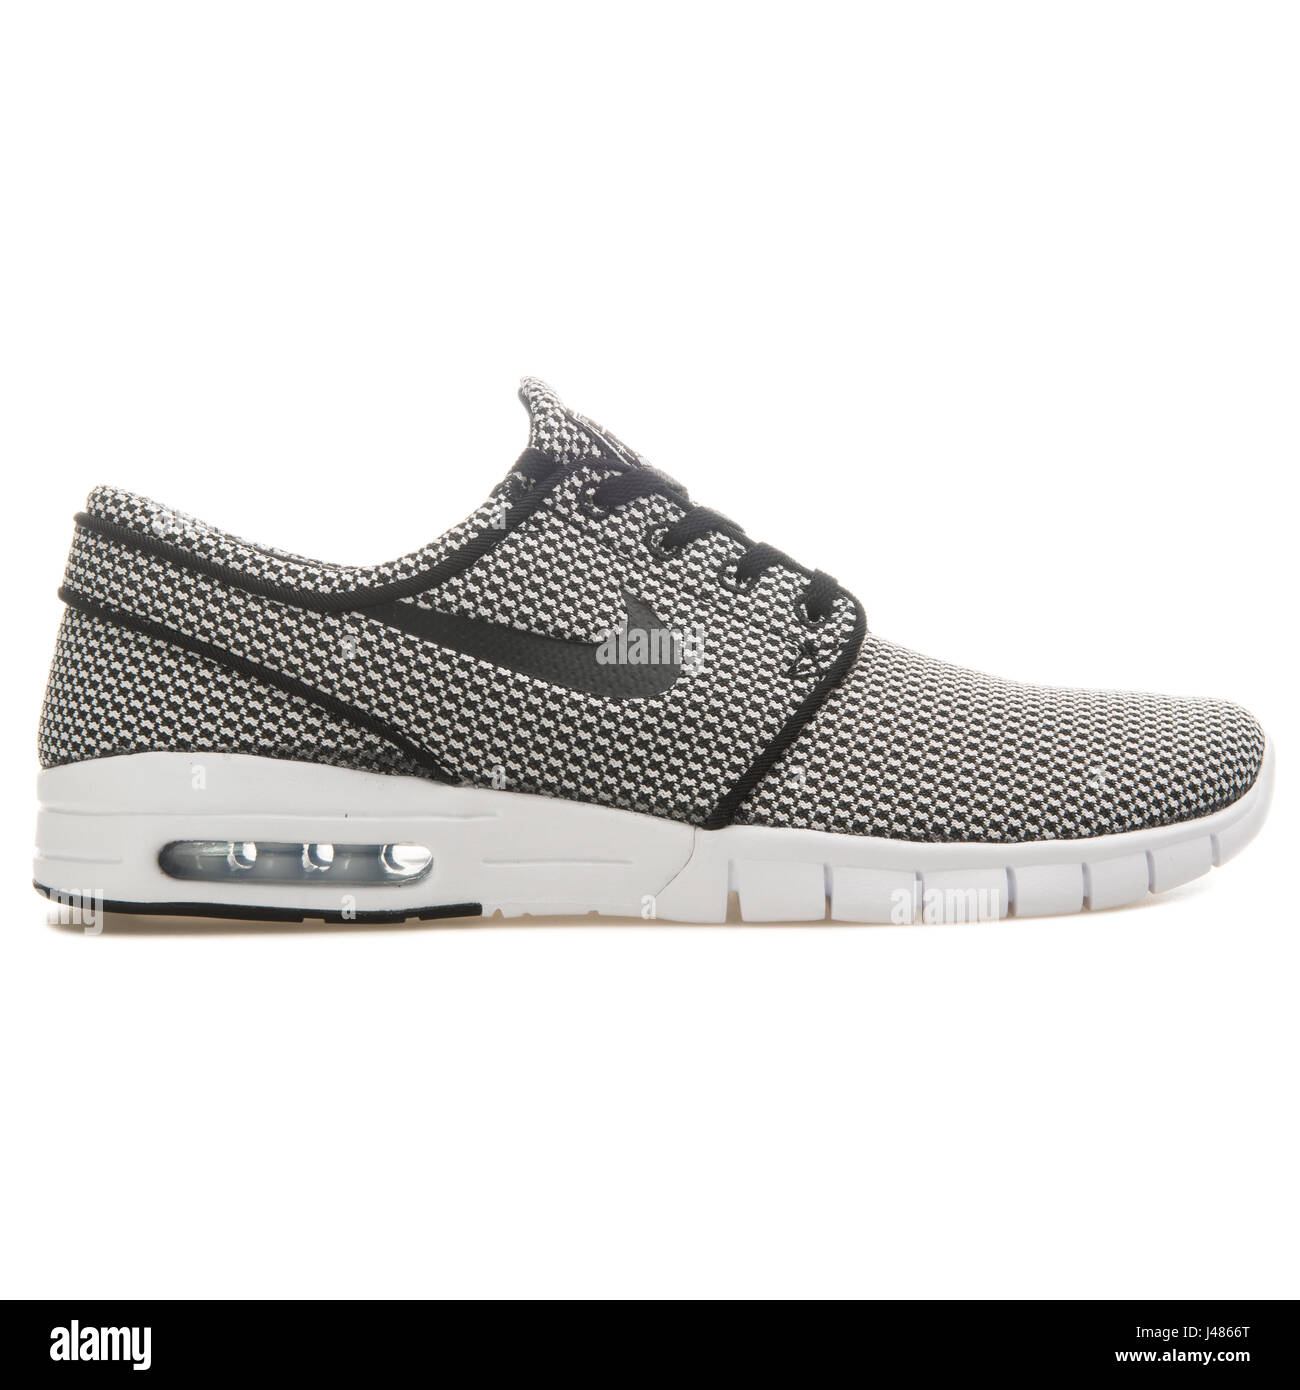 Stefan Janoski Max High Resolution Stock Photography and Images - Alamy